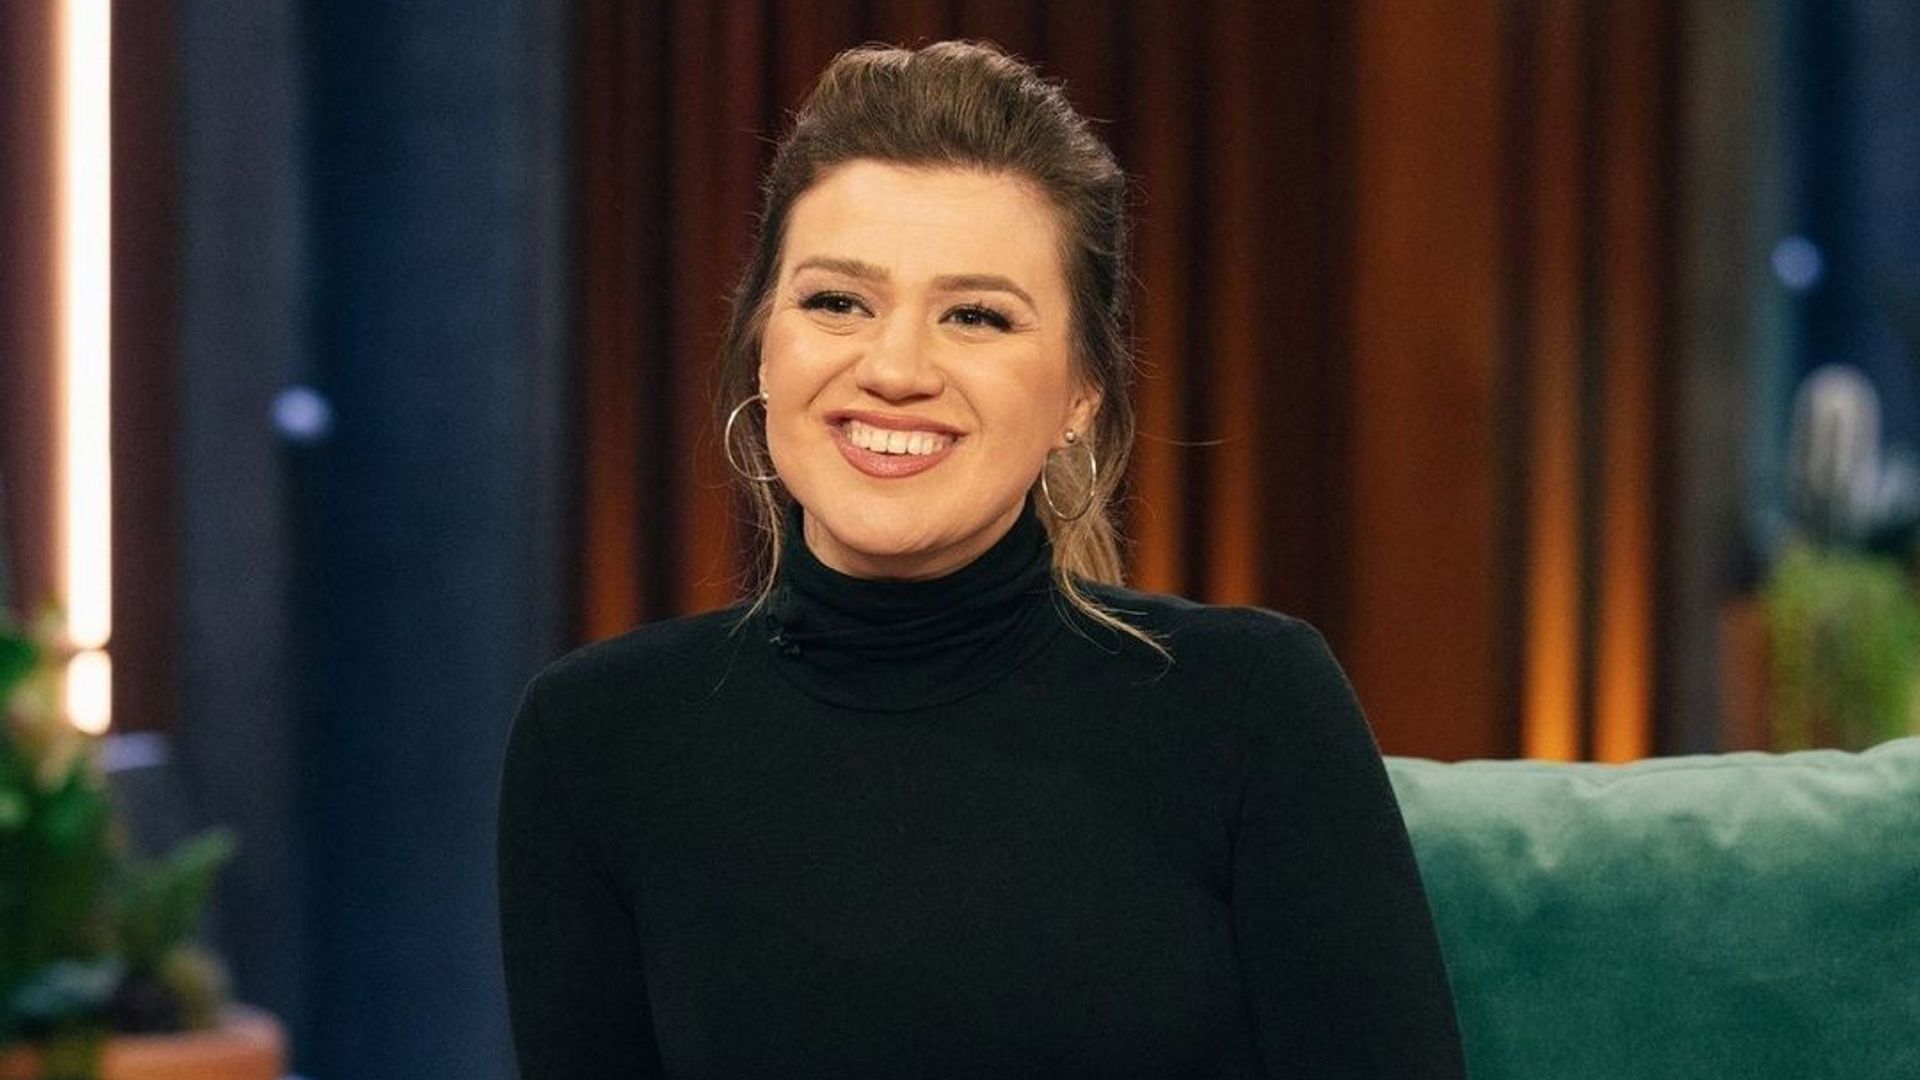 Kelly Clarkson shares 'beautiful' new update on life with her two kids as fans react